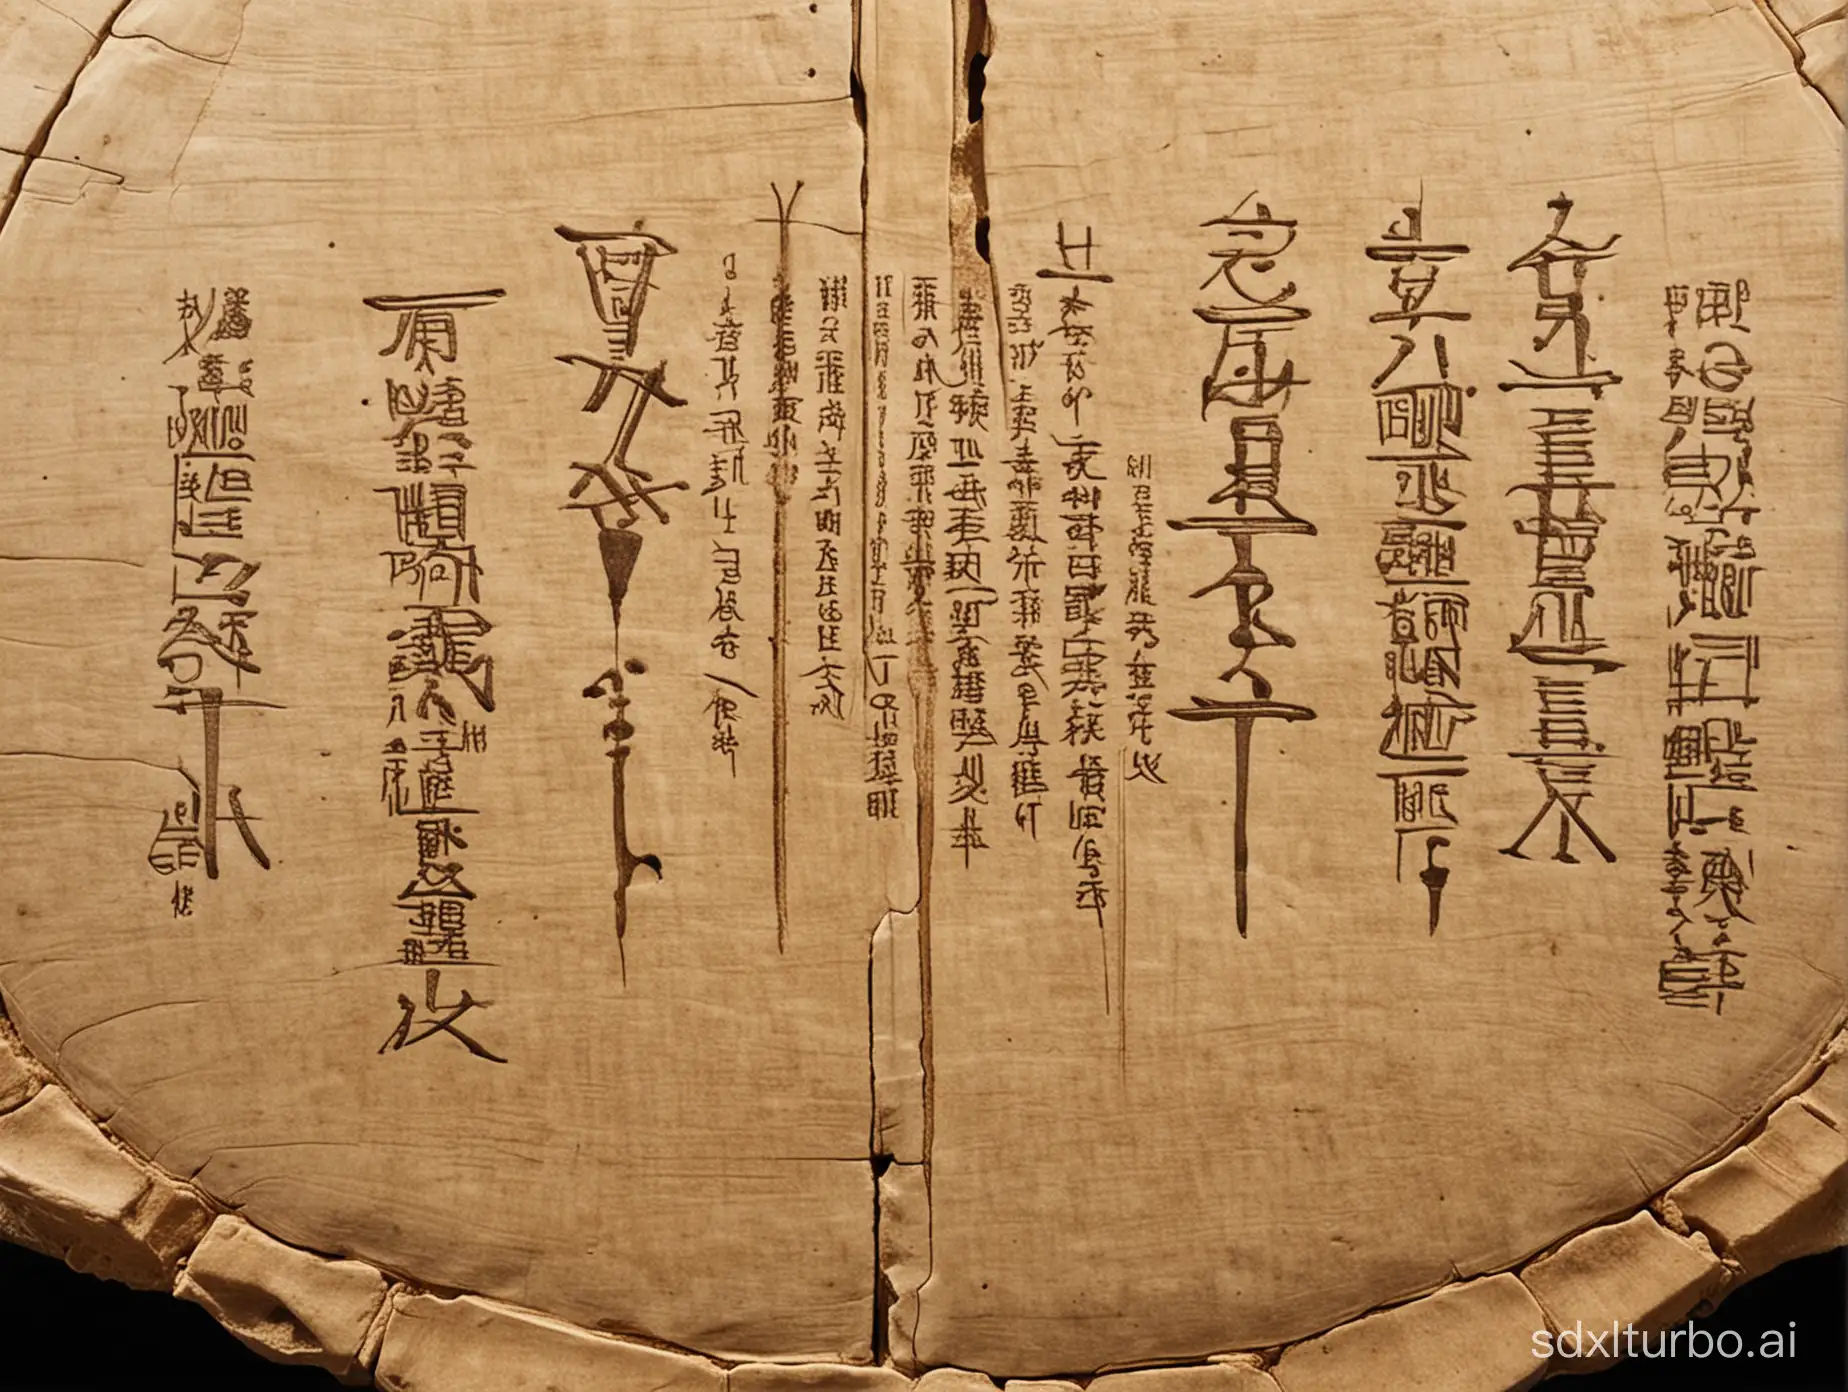 The oracle bone script on the back of the turtle